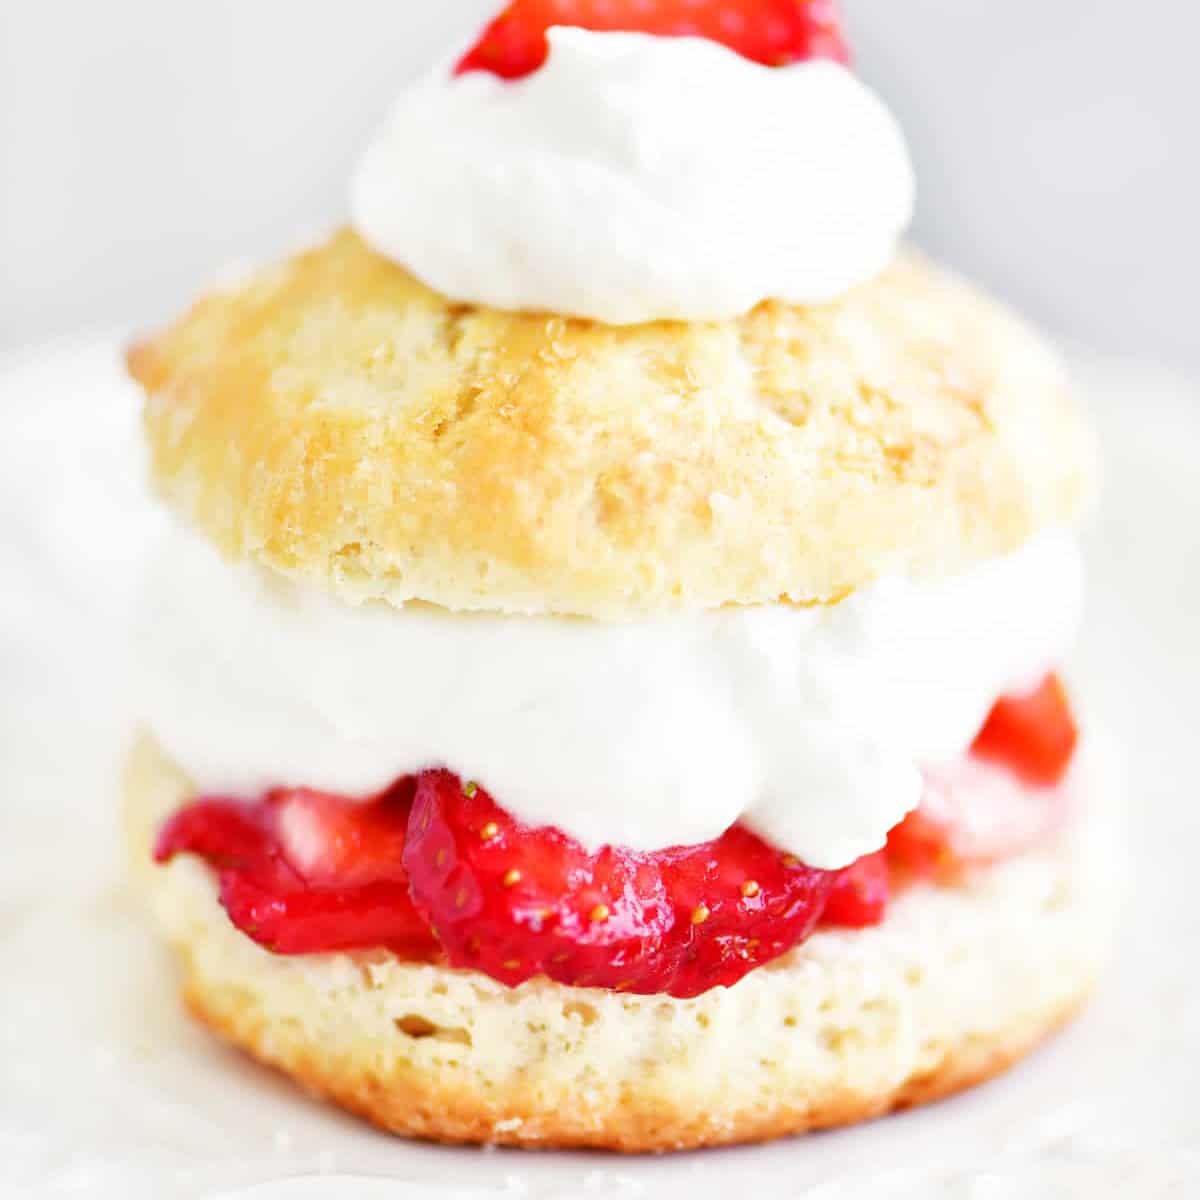 strawberry shortcake on a white plate with whipped cream